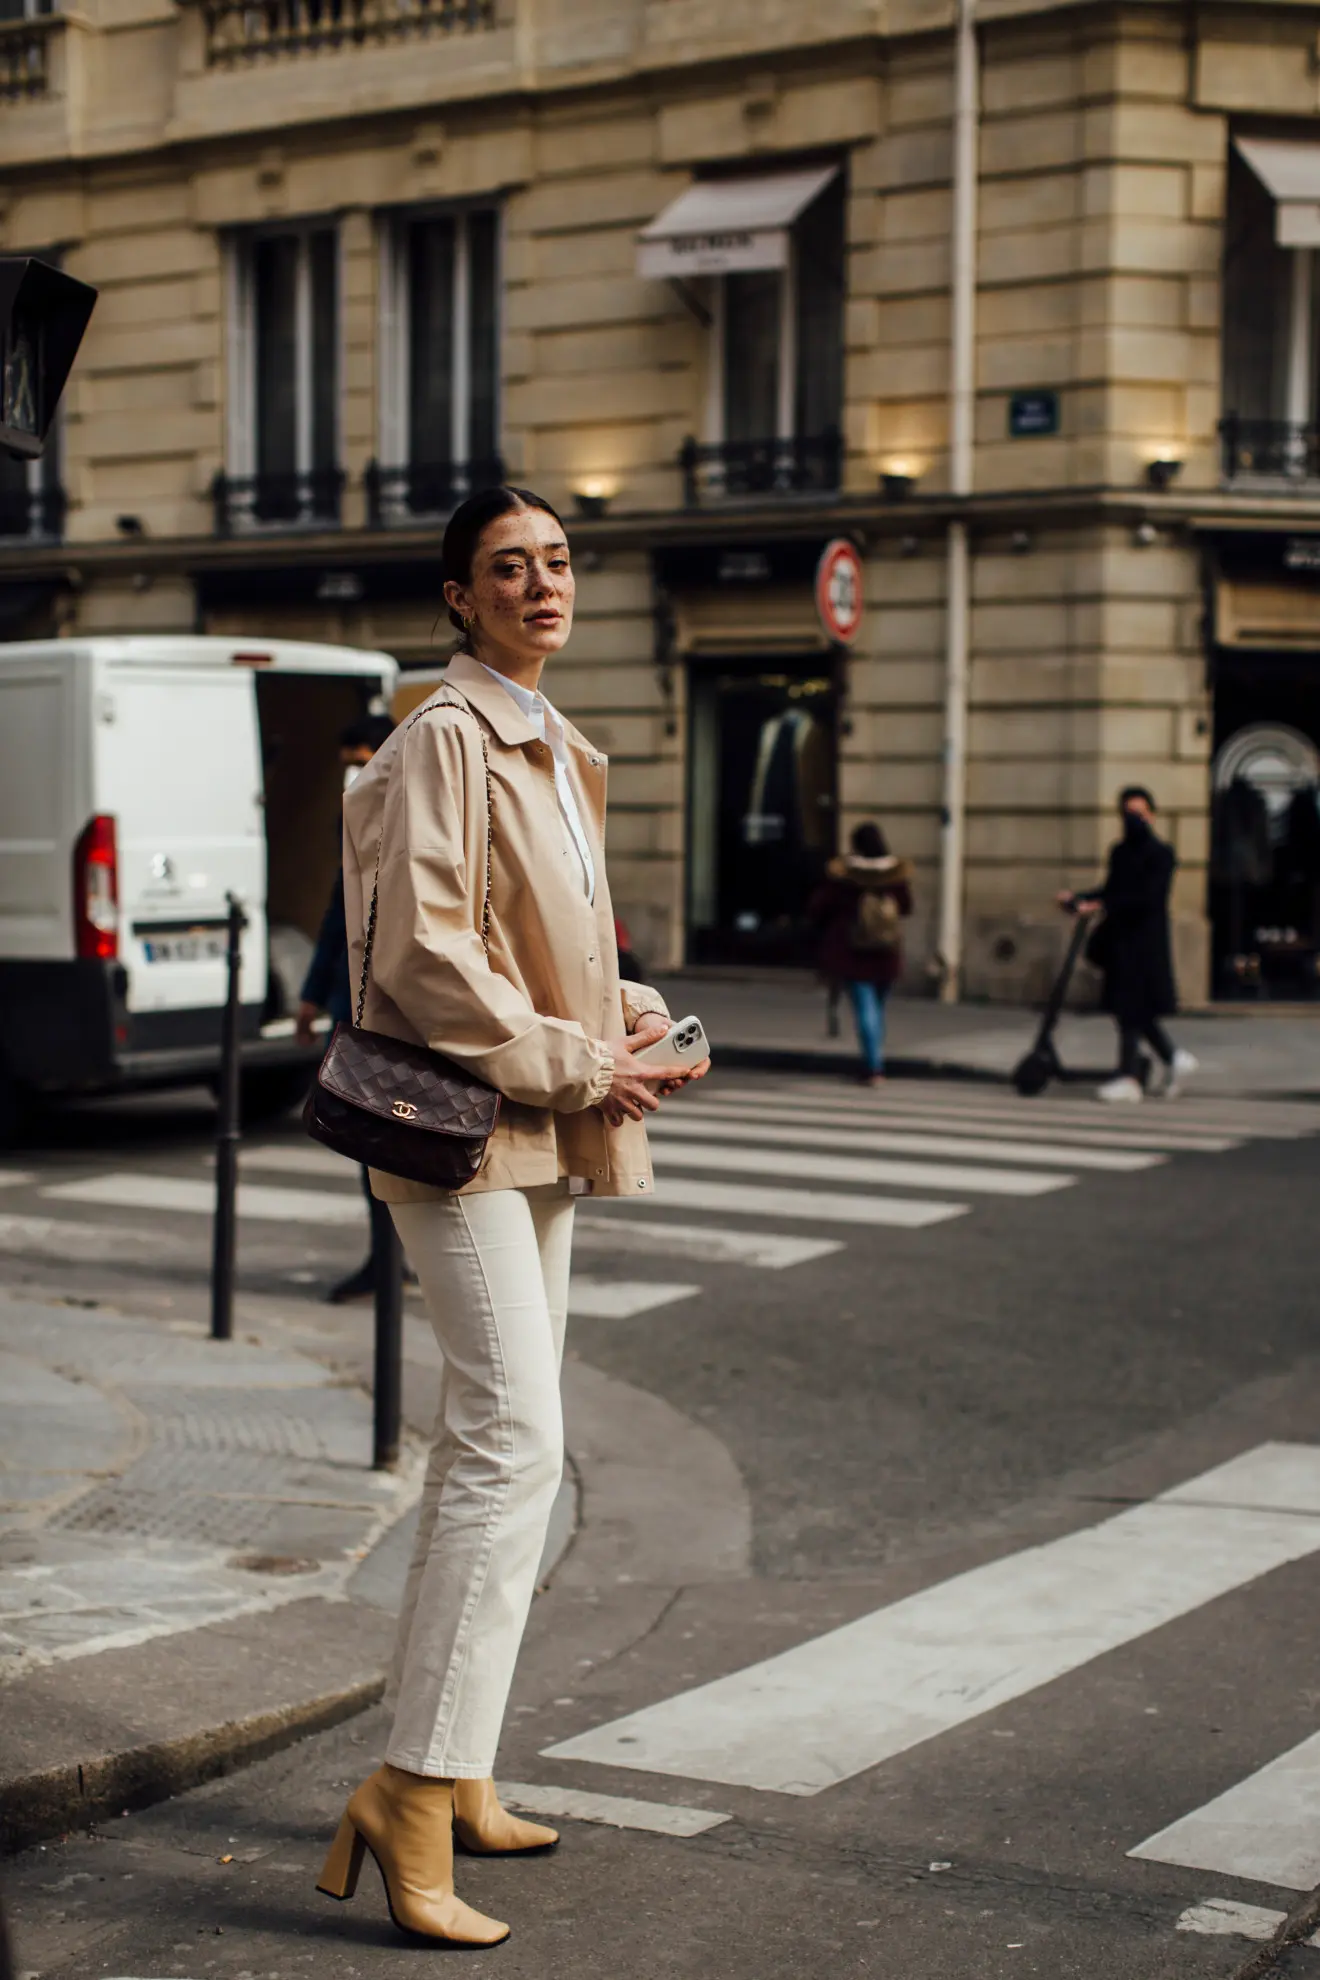 Paris-Inspired Fashion - A Byers Guide